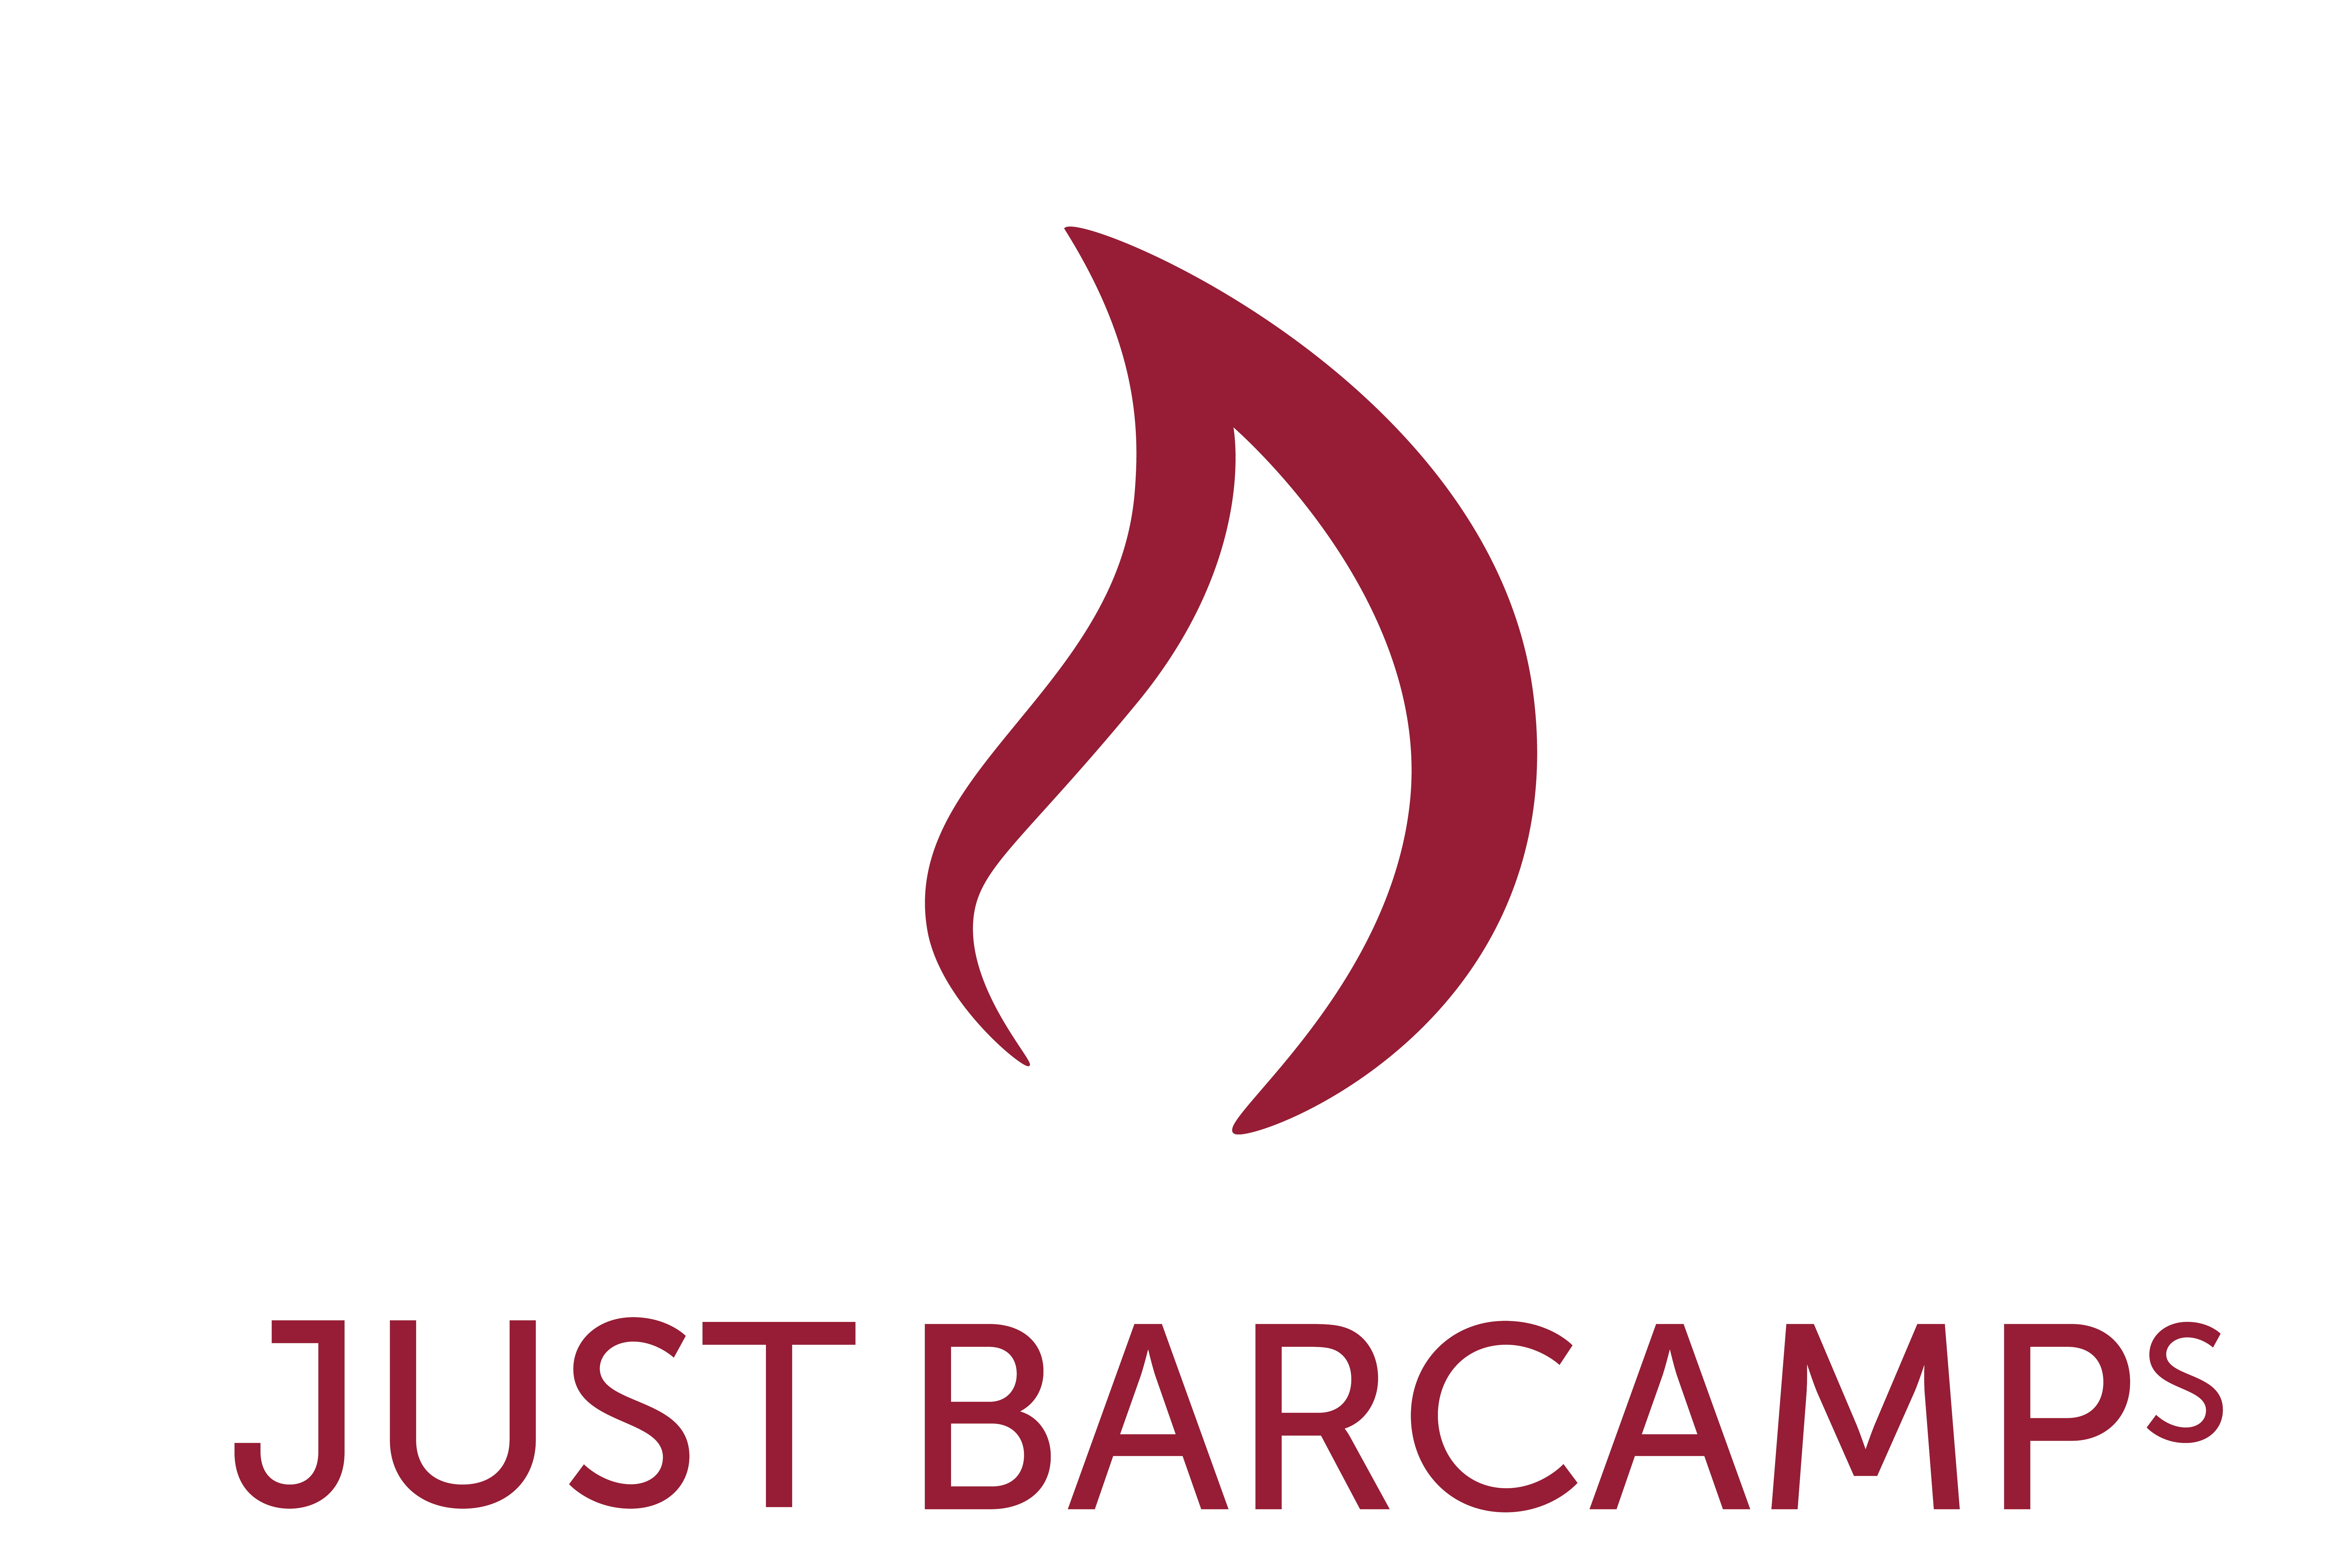 JUST BARCAMPs!